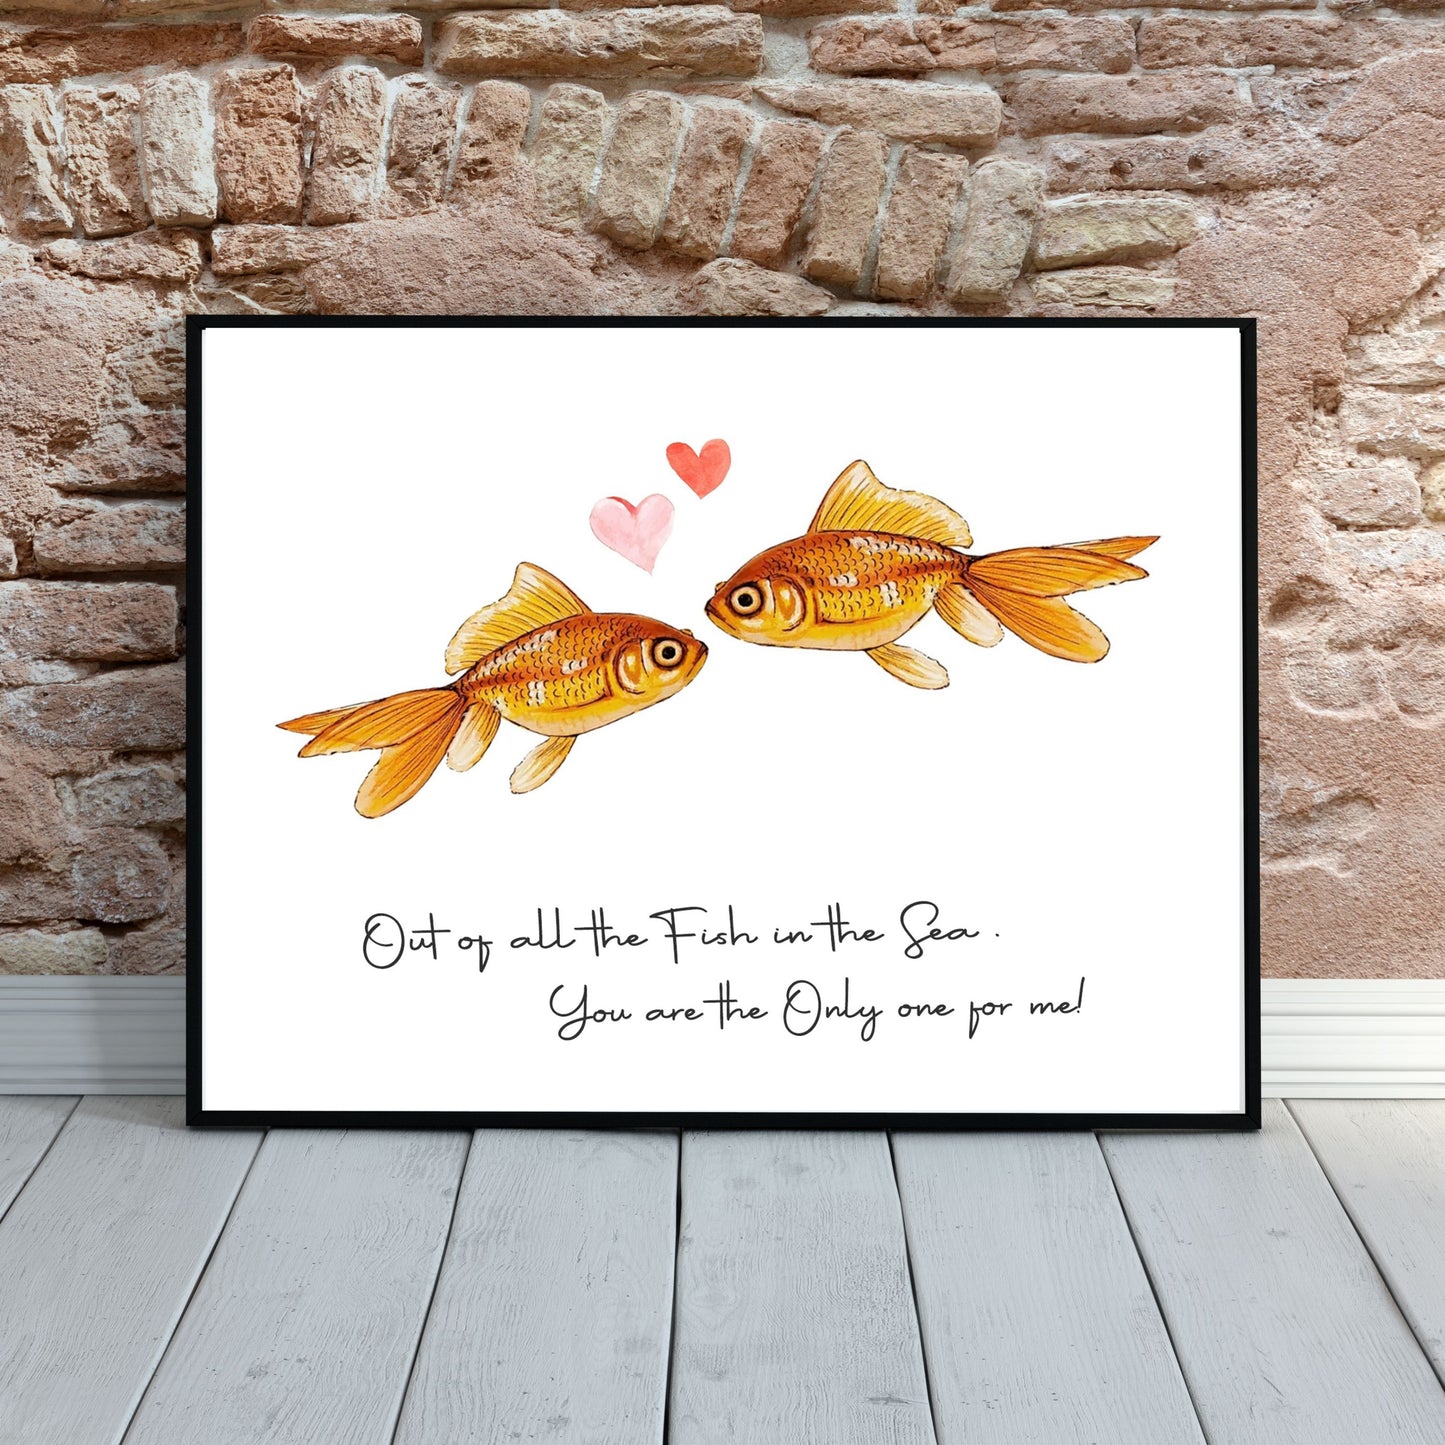 Out of all the fish in the sea you are the only one for me, Living room art, Cute wall decor, Bedroom art, Art for girlfriend, Home decor